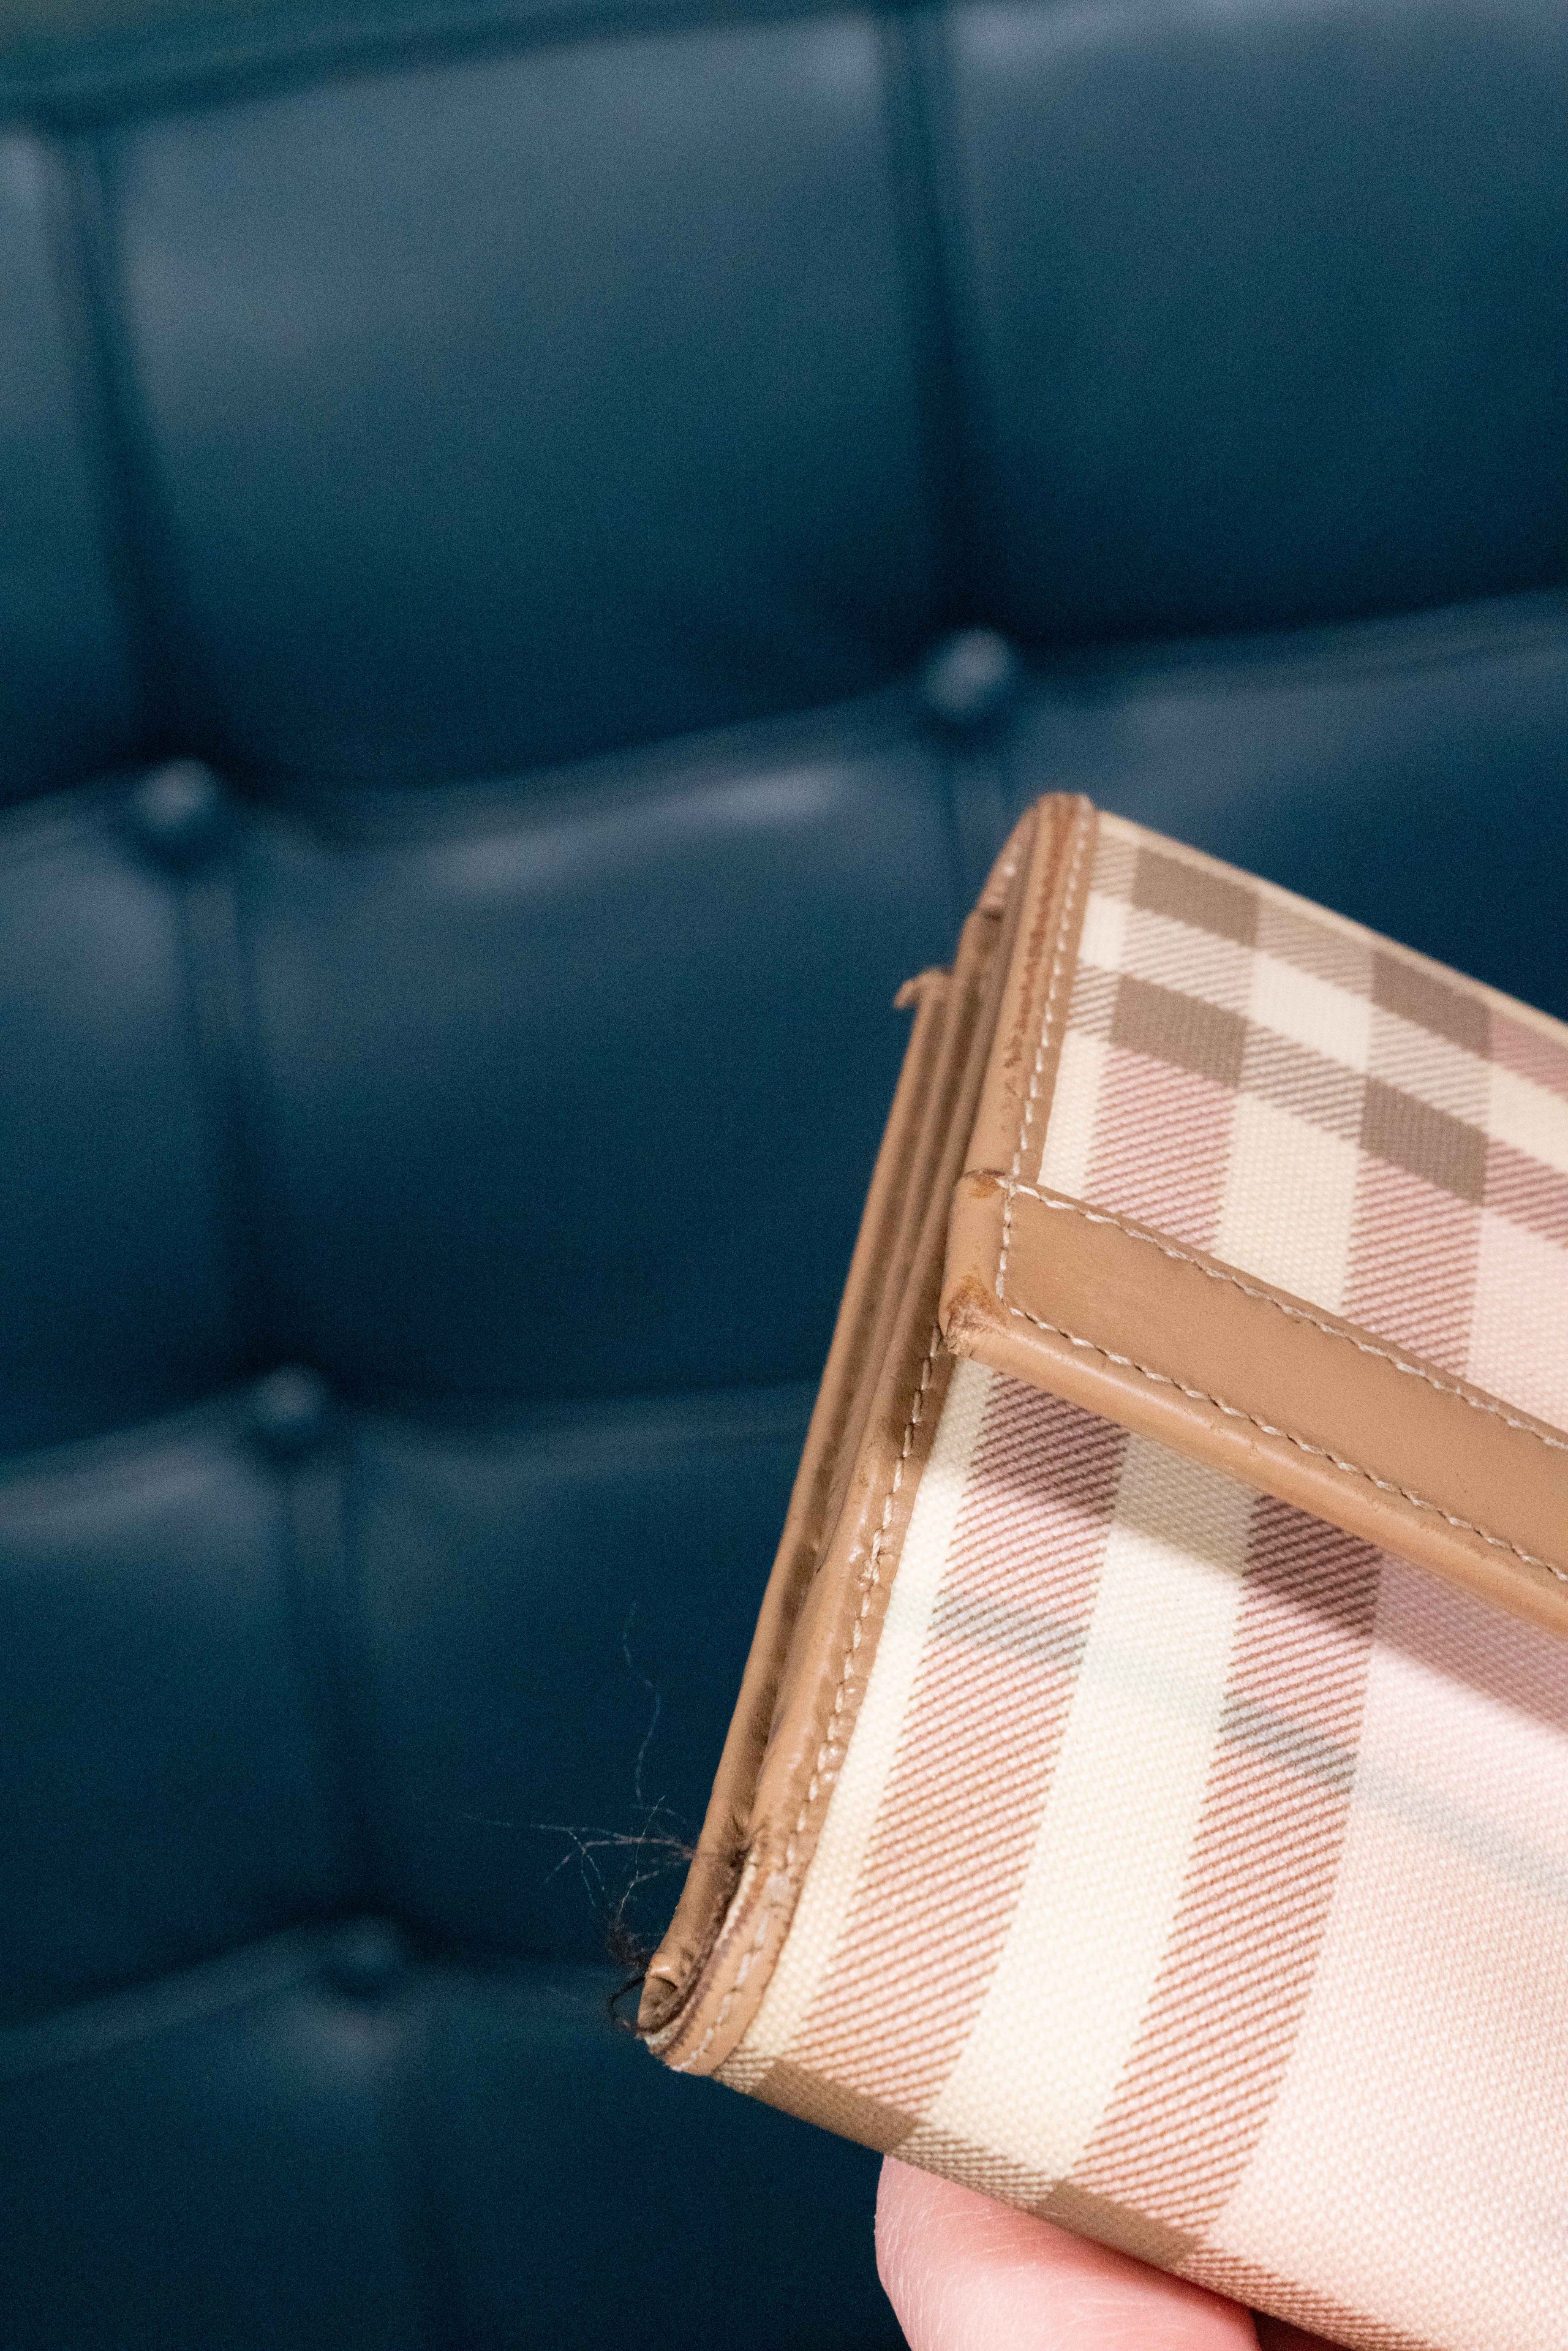 Burberry Light Pink Check French Wallet – The Closet